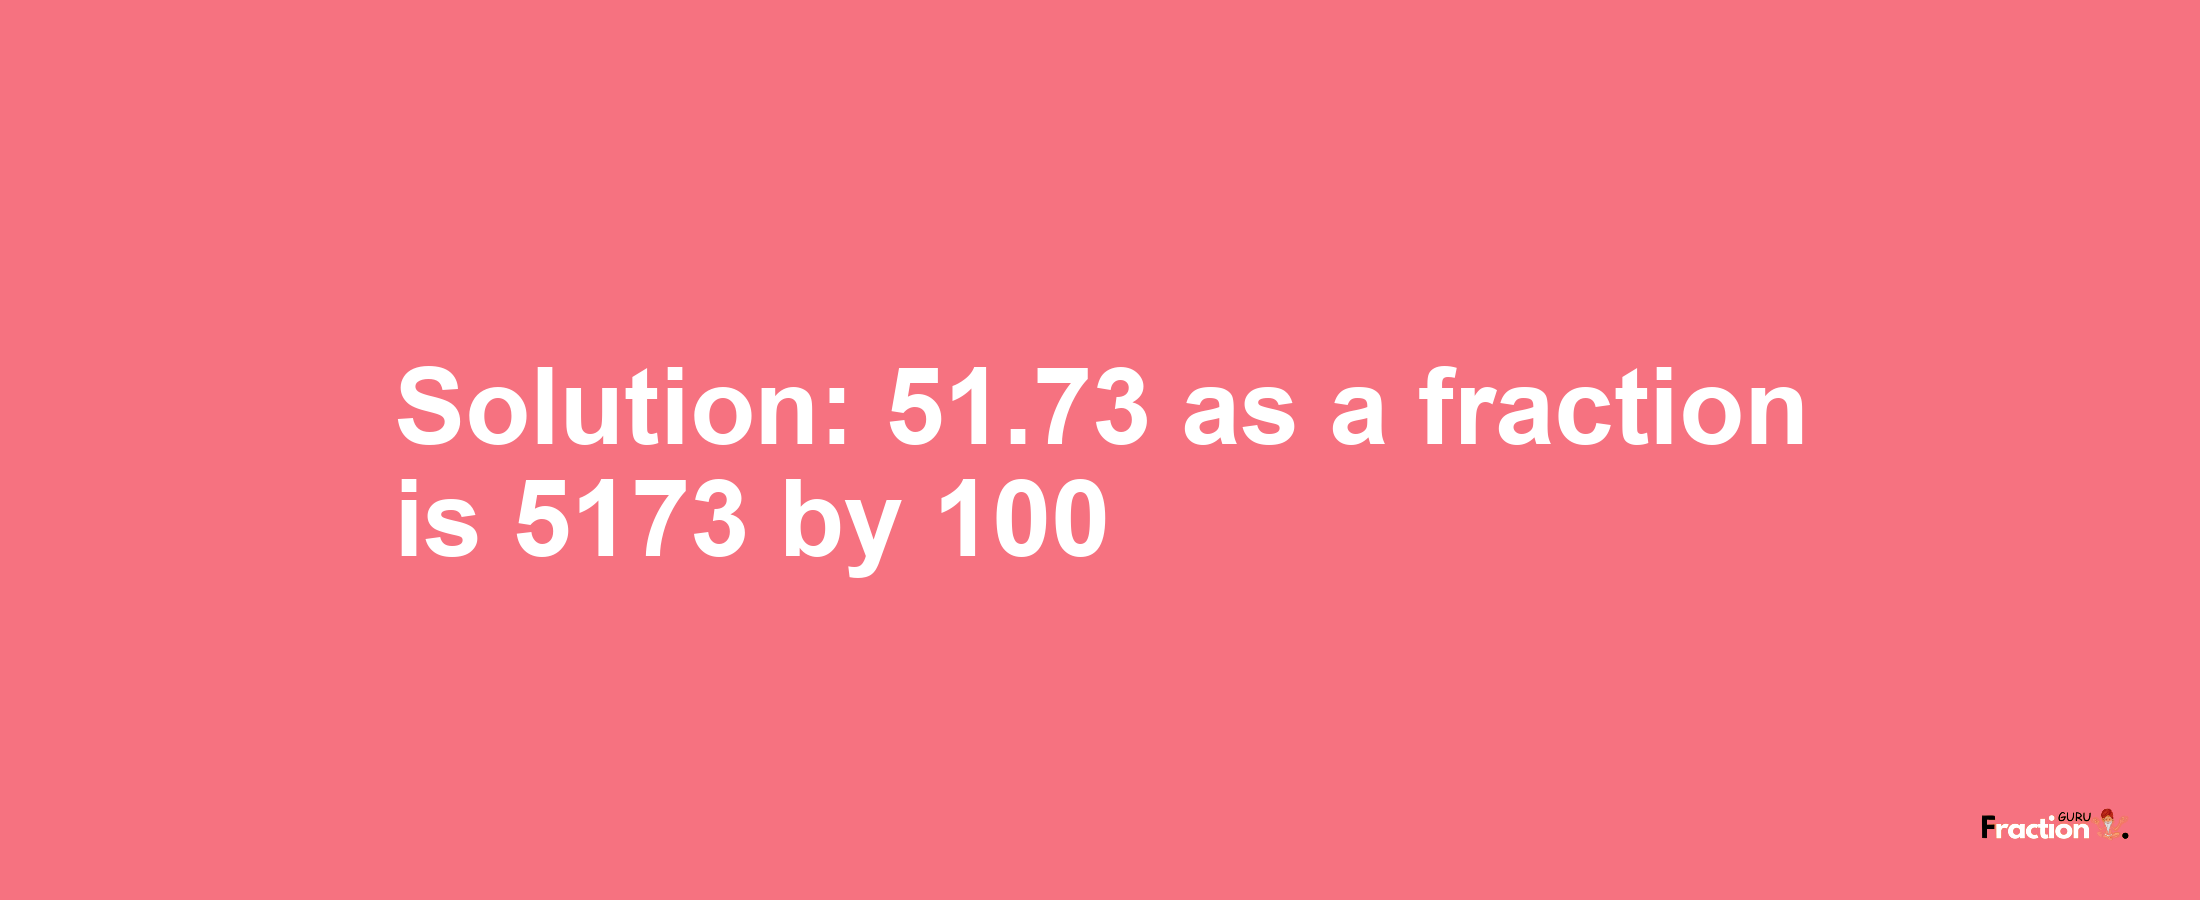 Solution:51.73 as a fraction is 5173/100